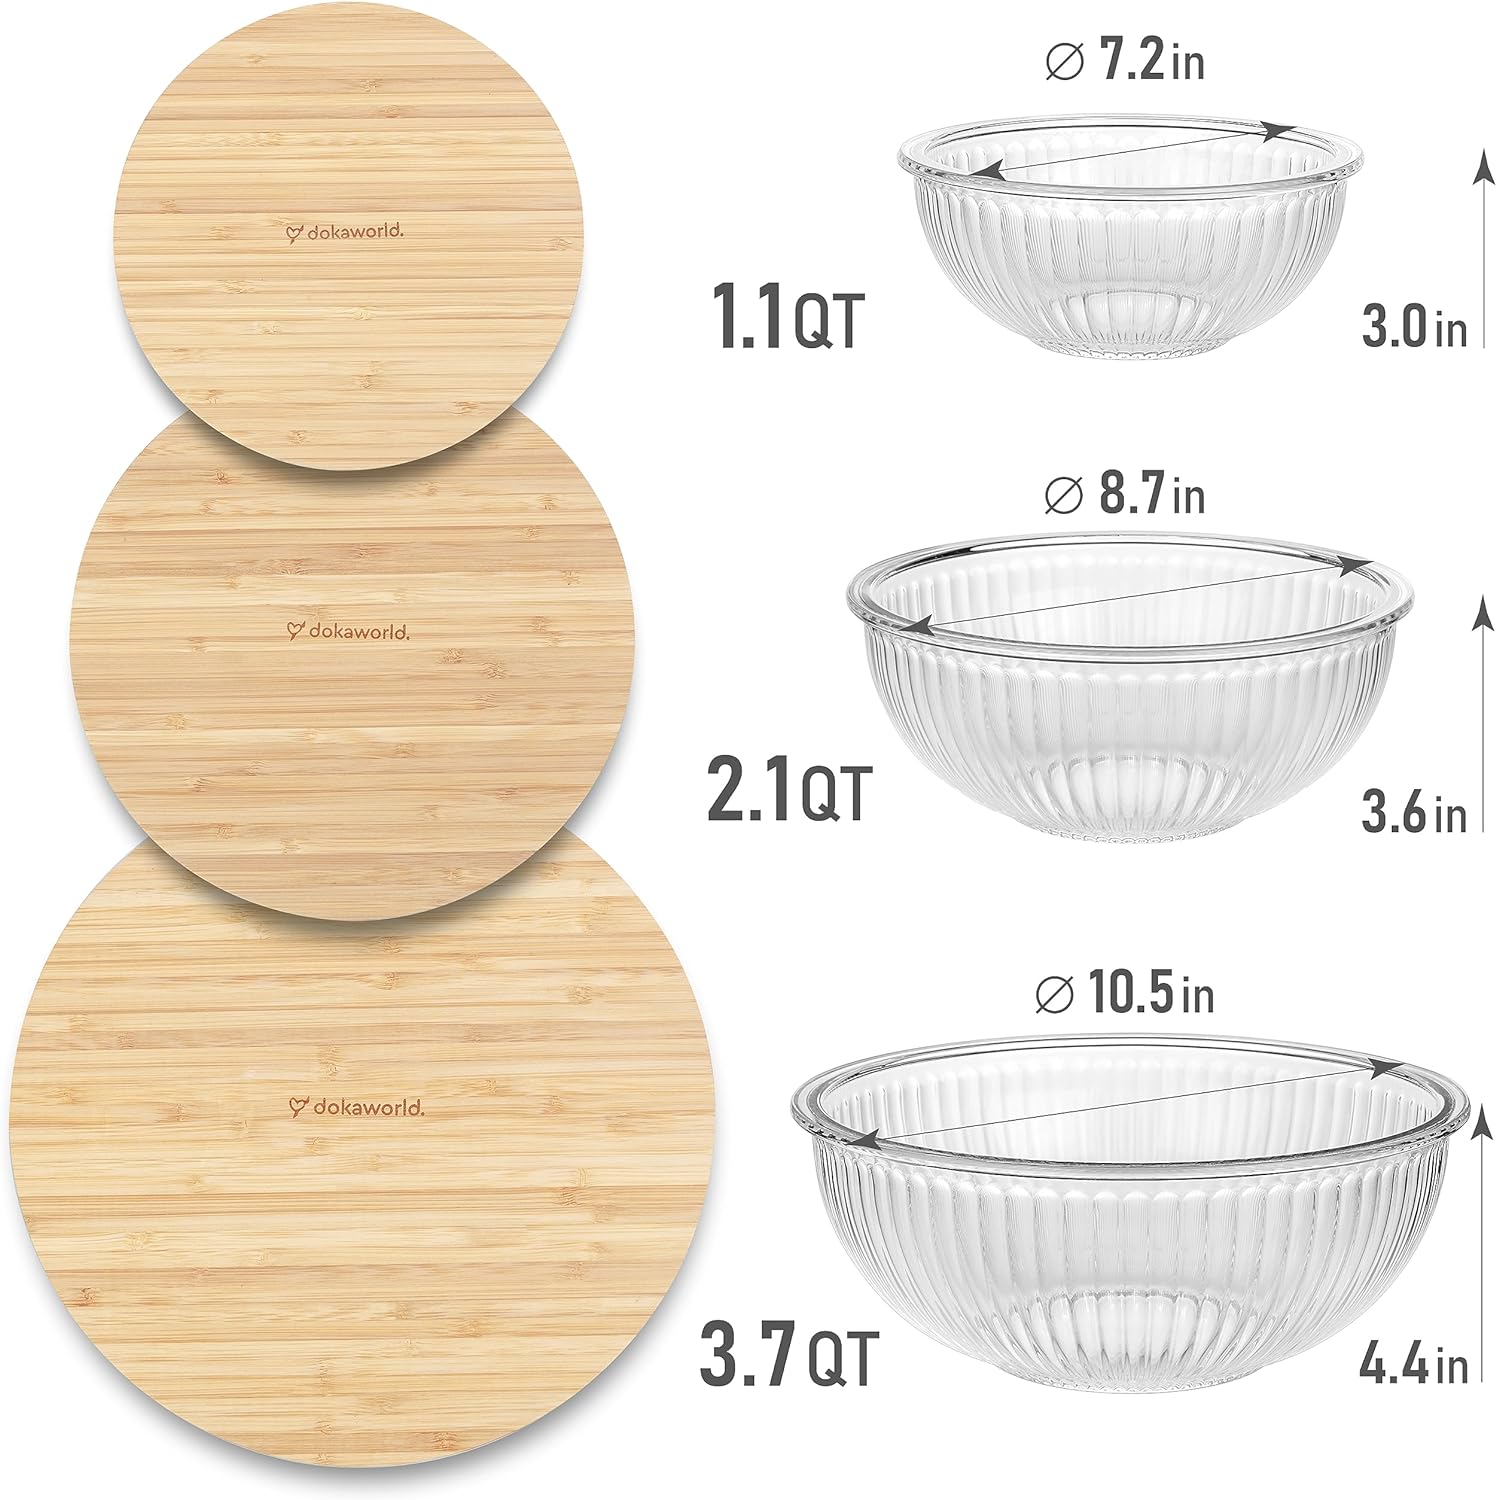 Best Deal for Glass Mixing Bowls - Nesting Bowls - Cute Collapsible Glass